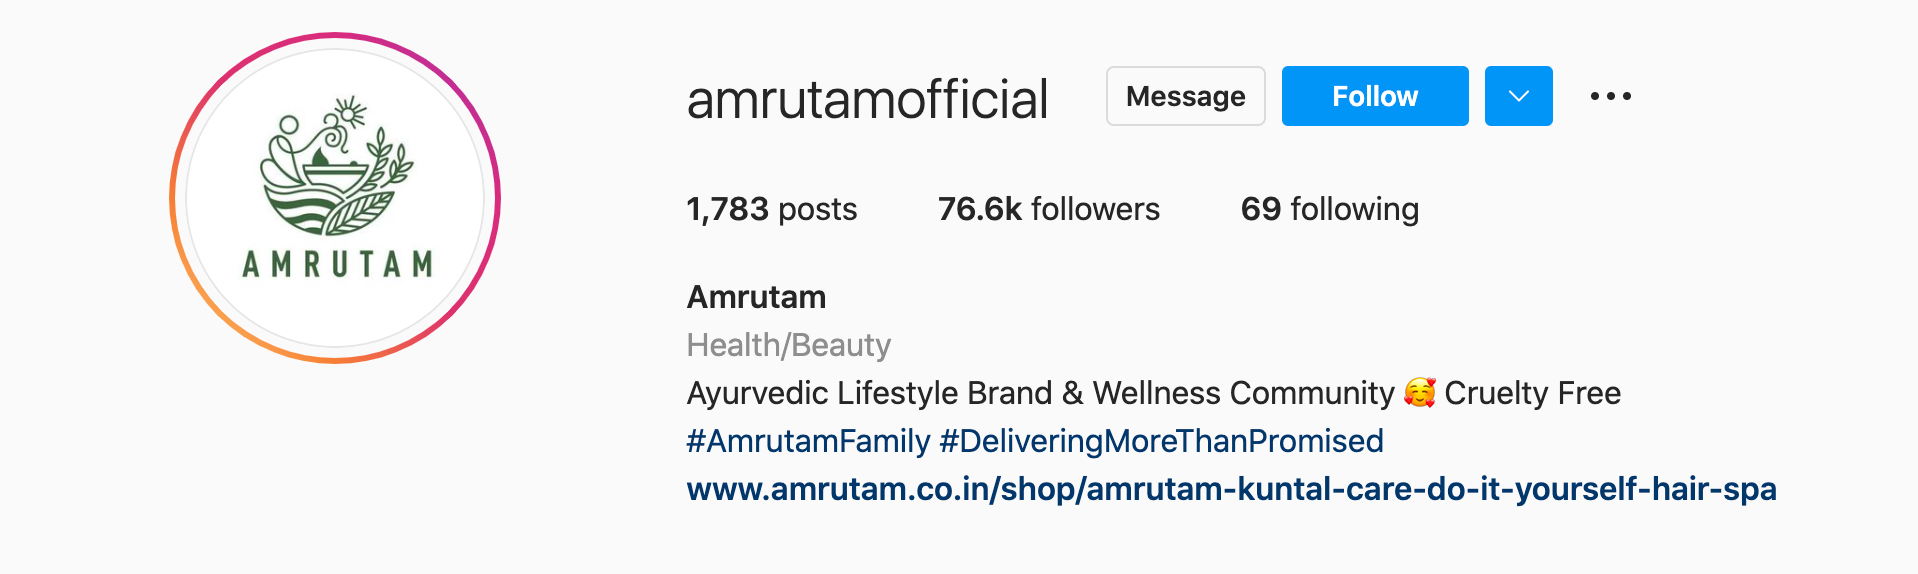 Instagram profile for Amrutam showing a green illustrated logo and an introduction to the brand.